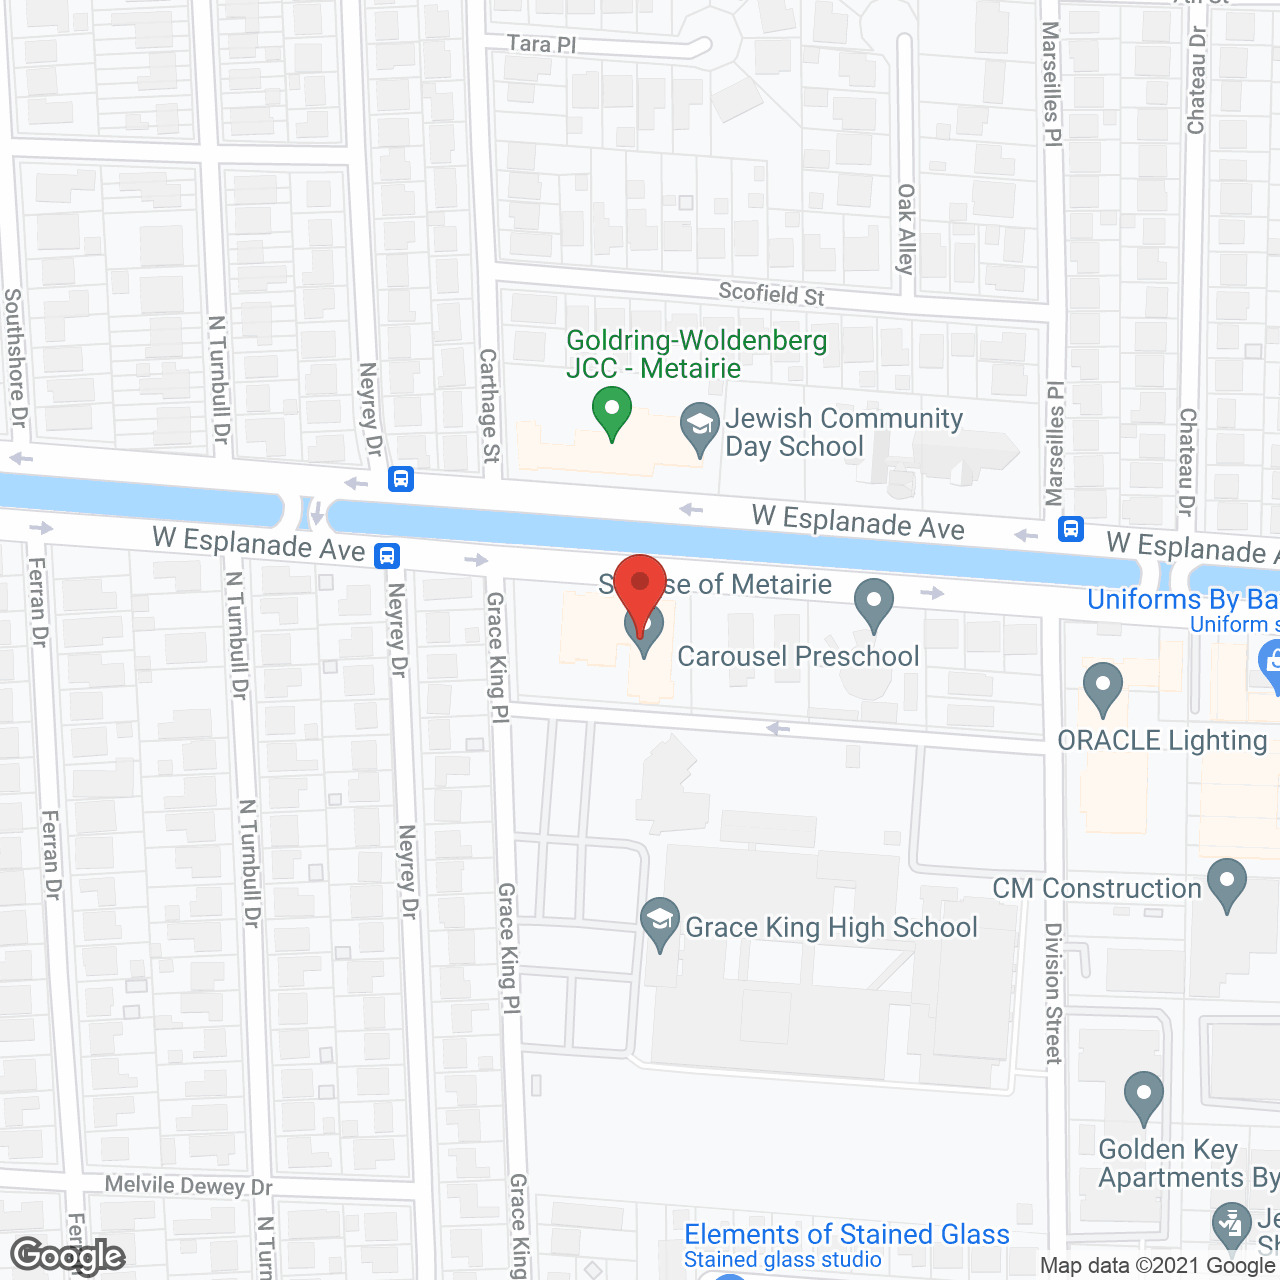 Sunrise of Metairie in google map